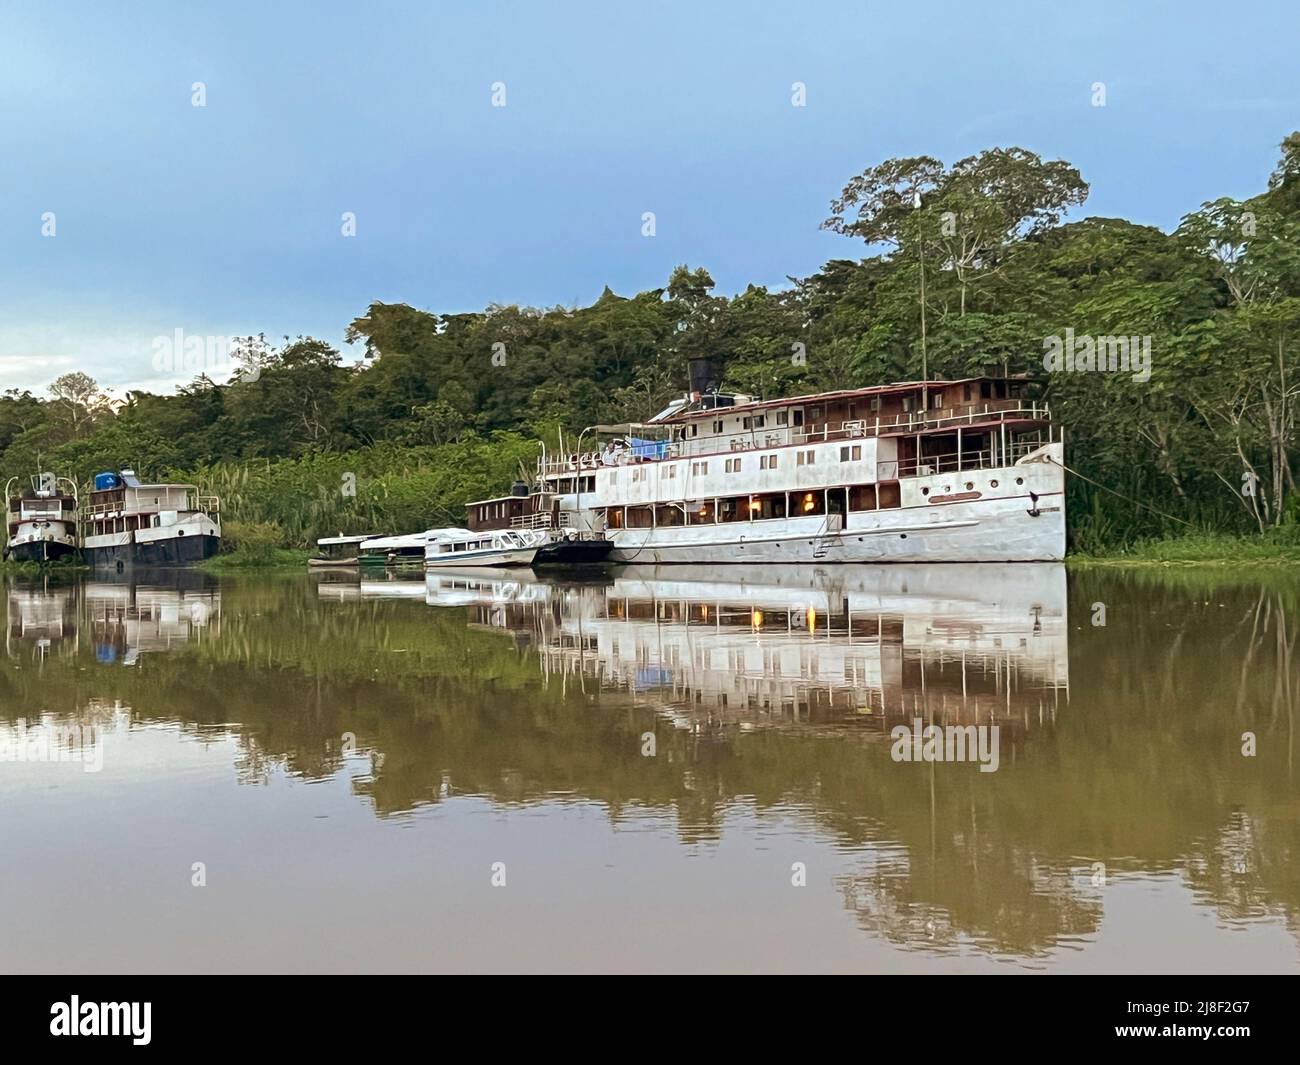 'Rio Amazonas' boat built in Scotland in 1899 for the Rubber Trade. The boat is shown docked on the Yarapa River, a tributary off the Amazon River. Stock Photo